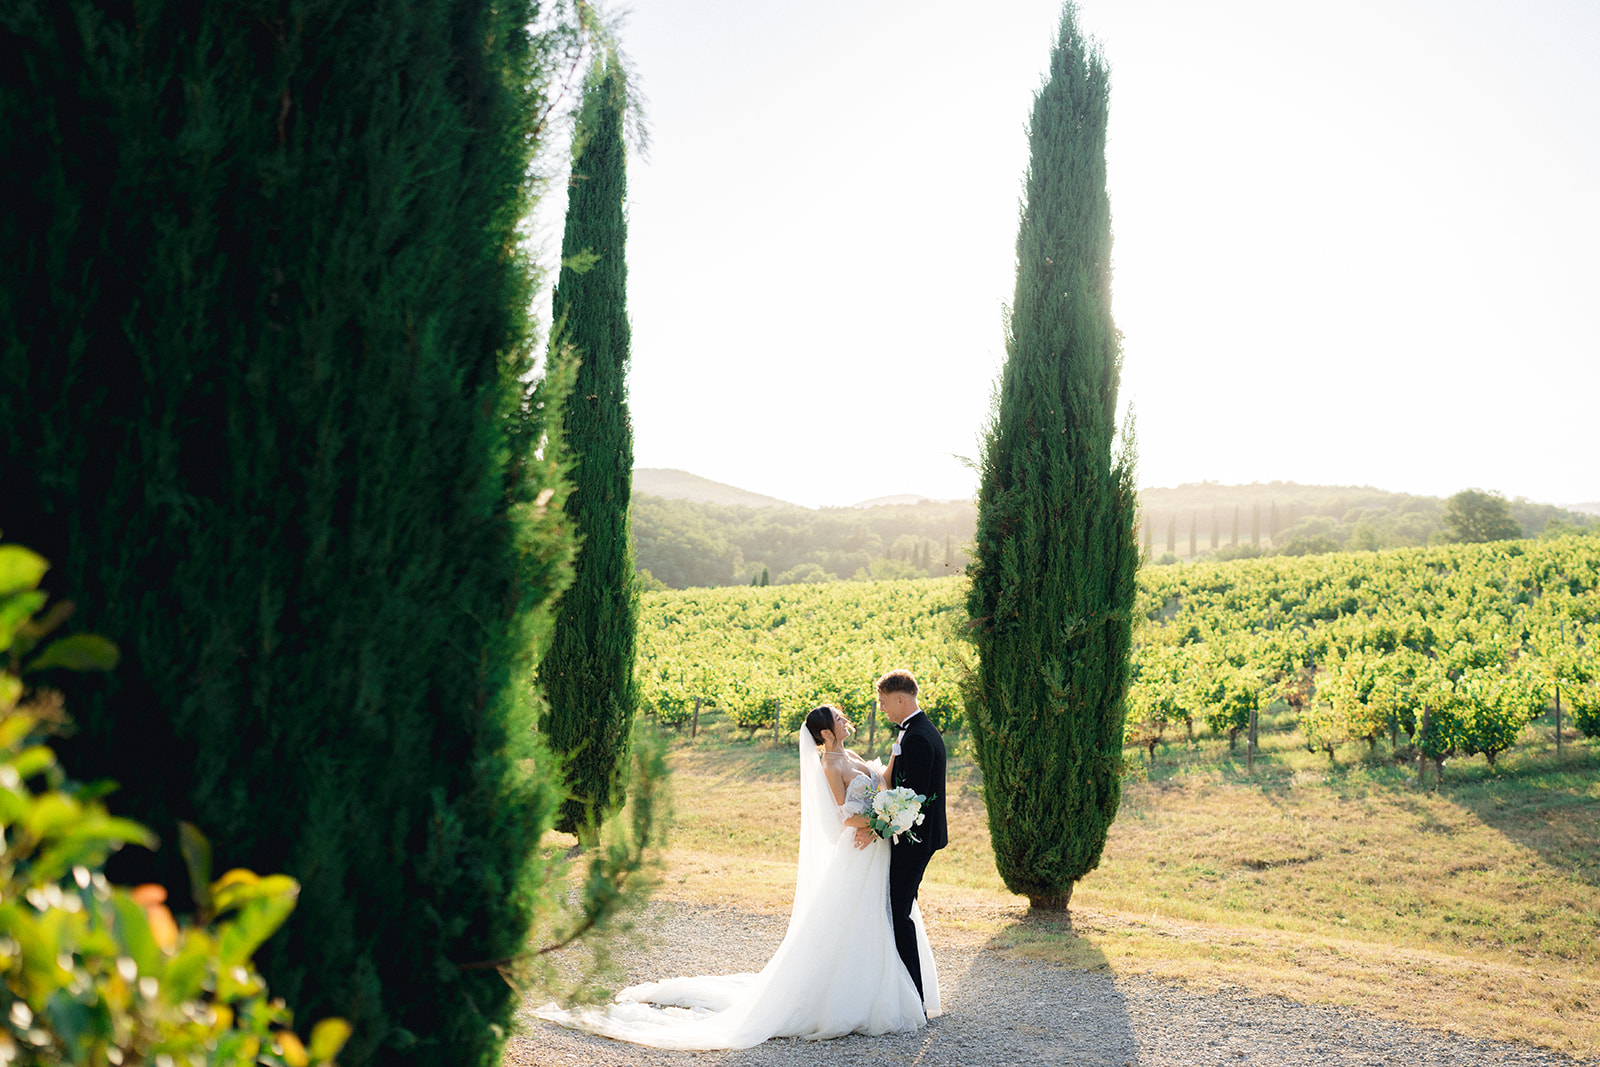 The newlyweds posing for photographs surrounded by the classic Tuscan landscape